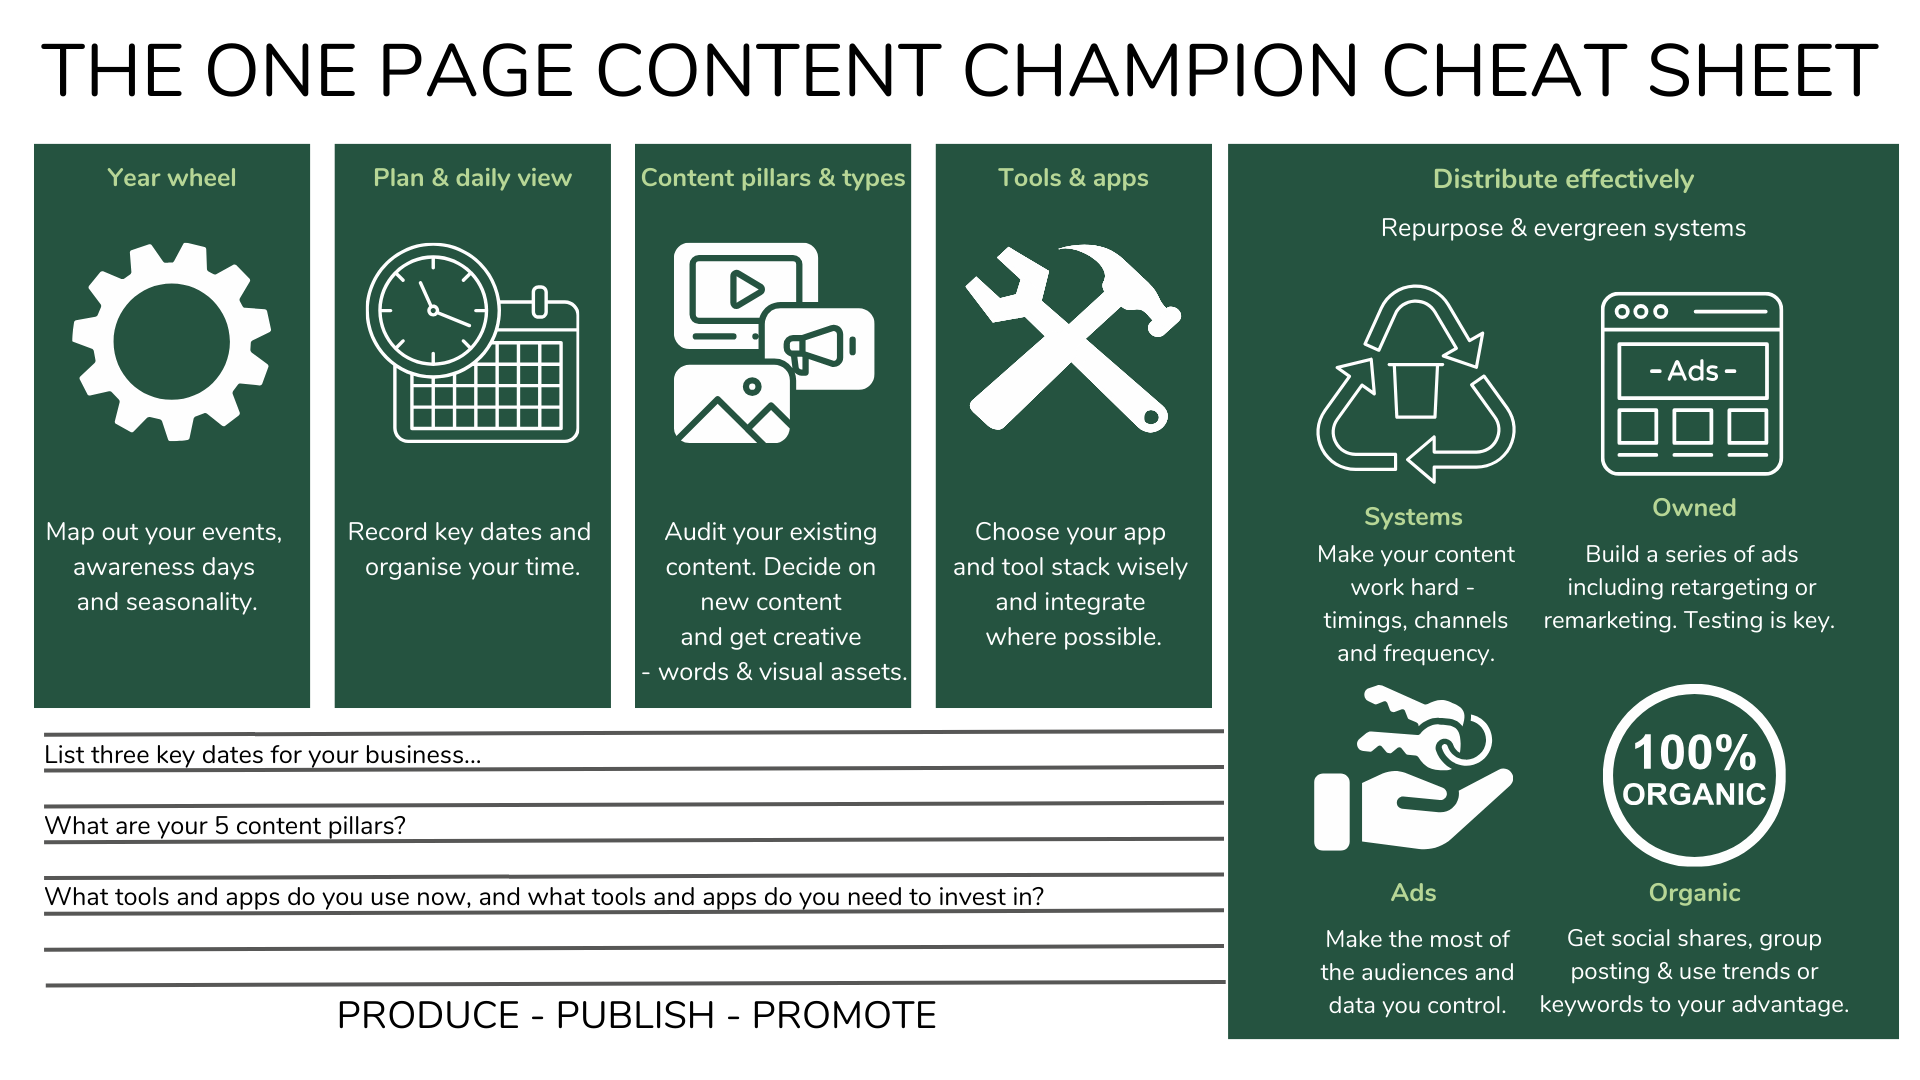 Effortlessly boost content engagement with our exclusive cheat sheet for content creators and marketers. Learn efficient strategies for content production, publishing, and promotion, promising up to 10x more audience engagement.